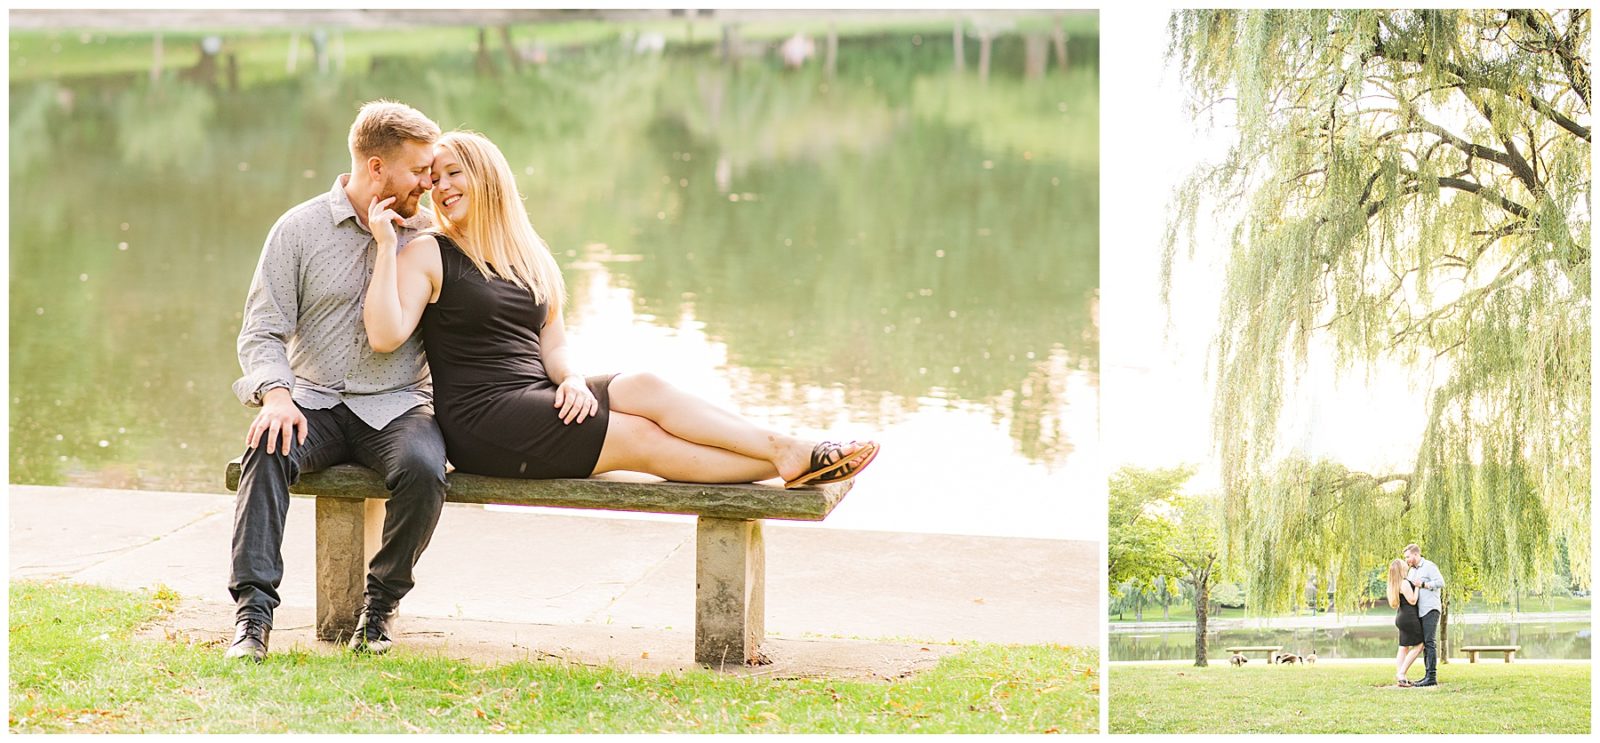 A Cleveland engagement session, wade lagoon photos, summer photos, sweet and candid photos, romantic engagement photos, outfit ideas, soft floral dress, pond photos, golden hour, glowy light